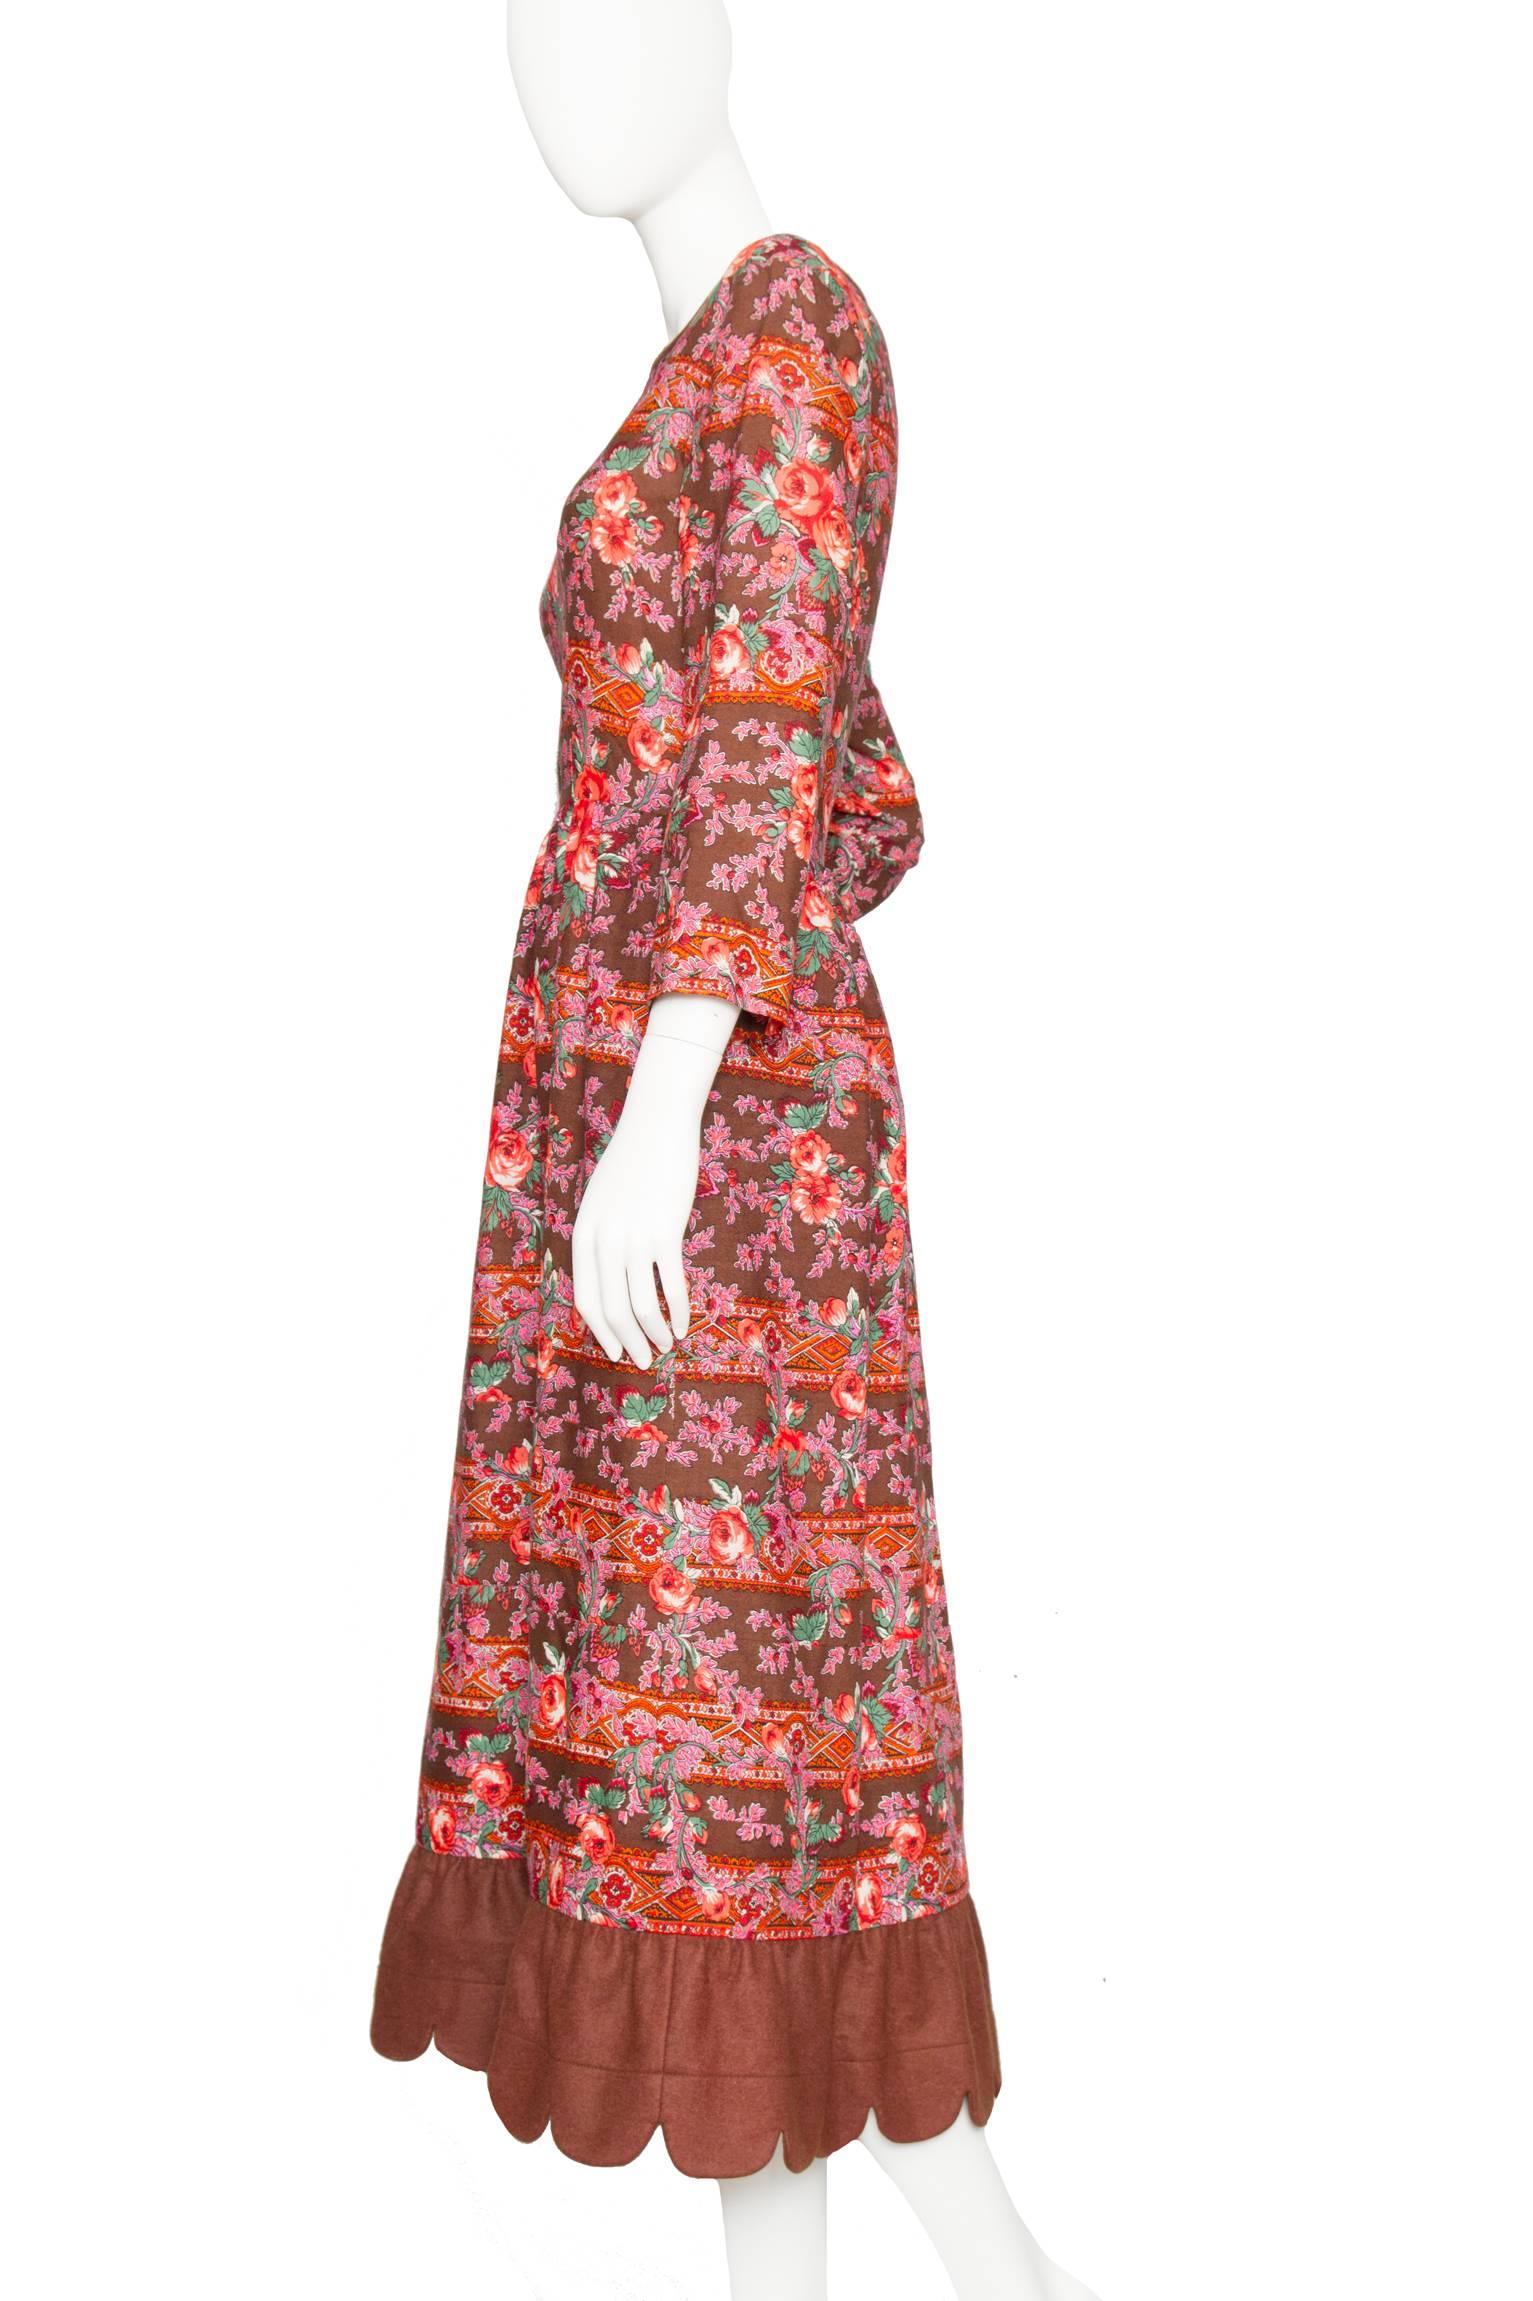 A 1970s Lanvin ankle-length wool dress with a fitted hem, long tapered sleeves, and a round neckline. The dress features a stunning floral print in matching pink hues with accented leaves in green and white, which beautifully compliments the brown